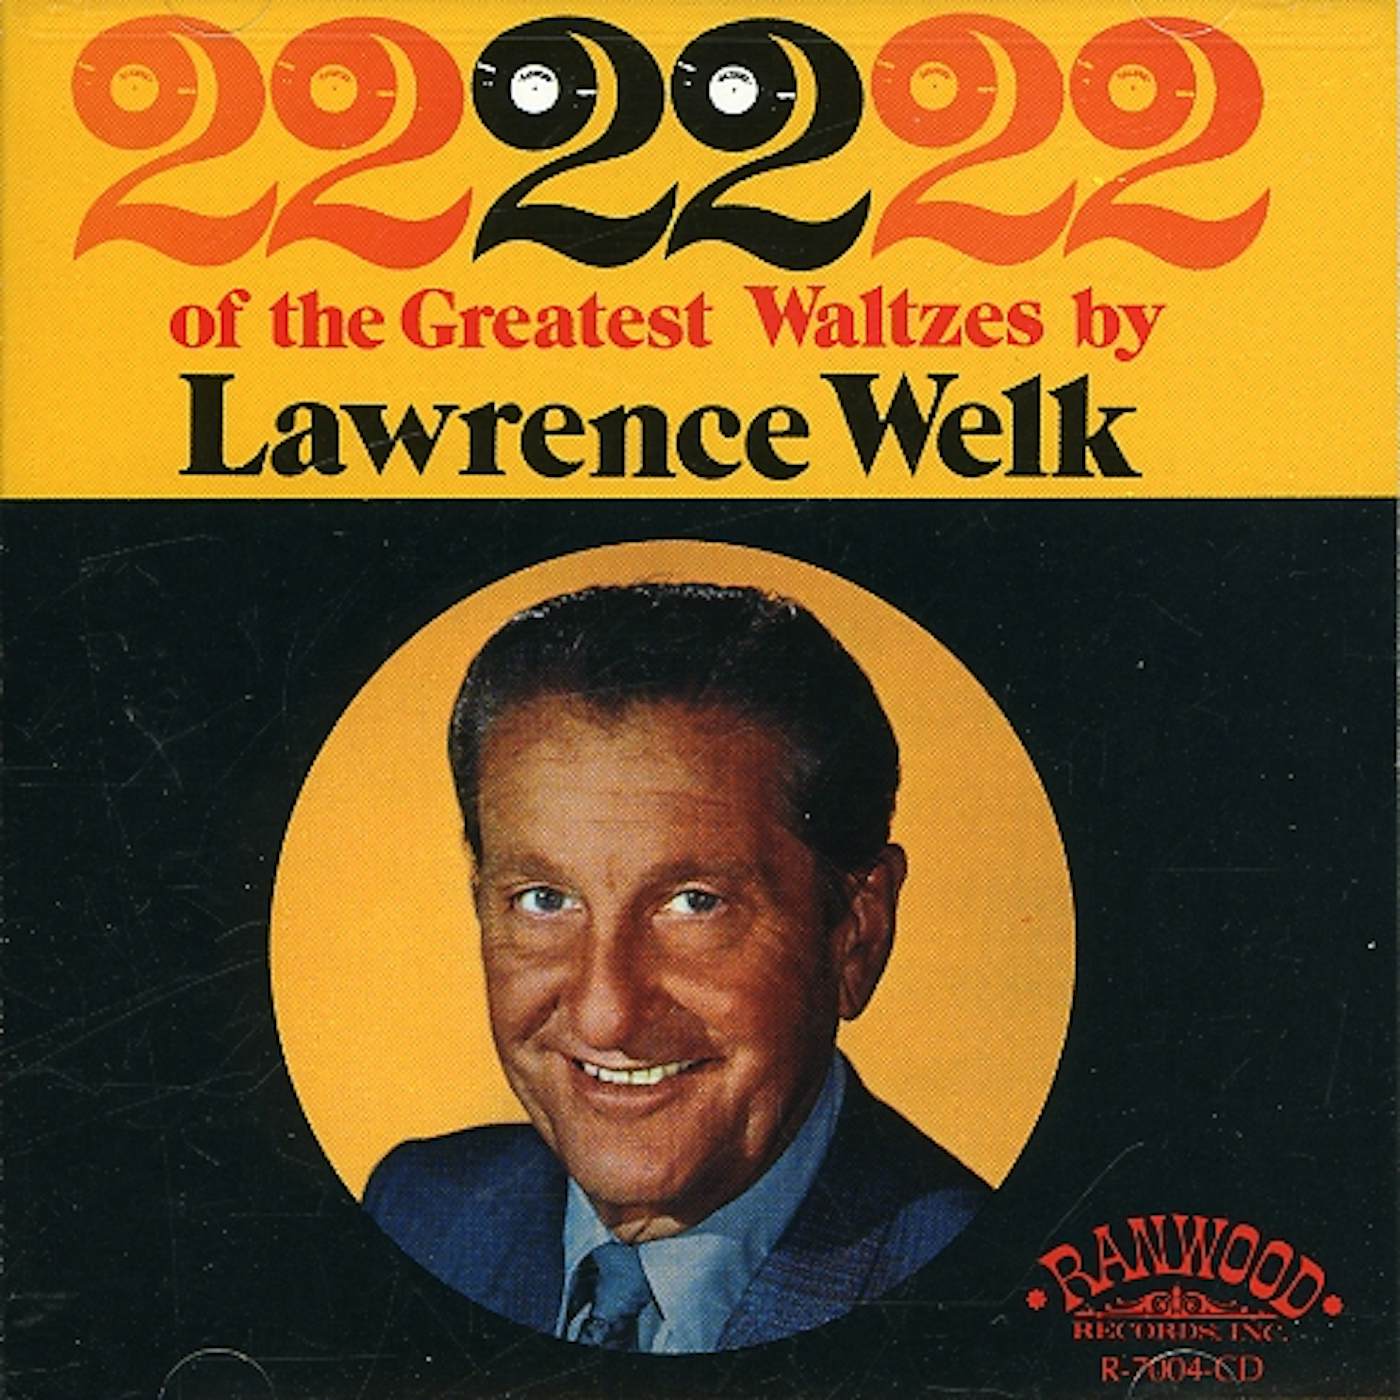 Lawrence Welk 22 OF THE GREATEST WALTZES CD